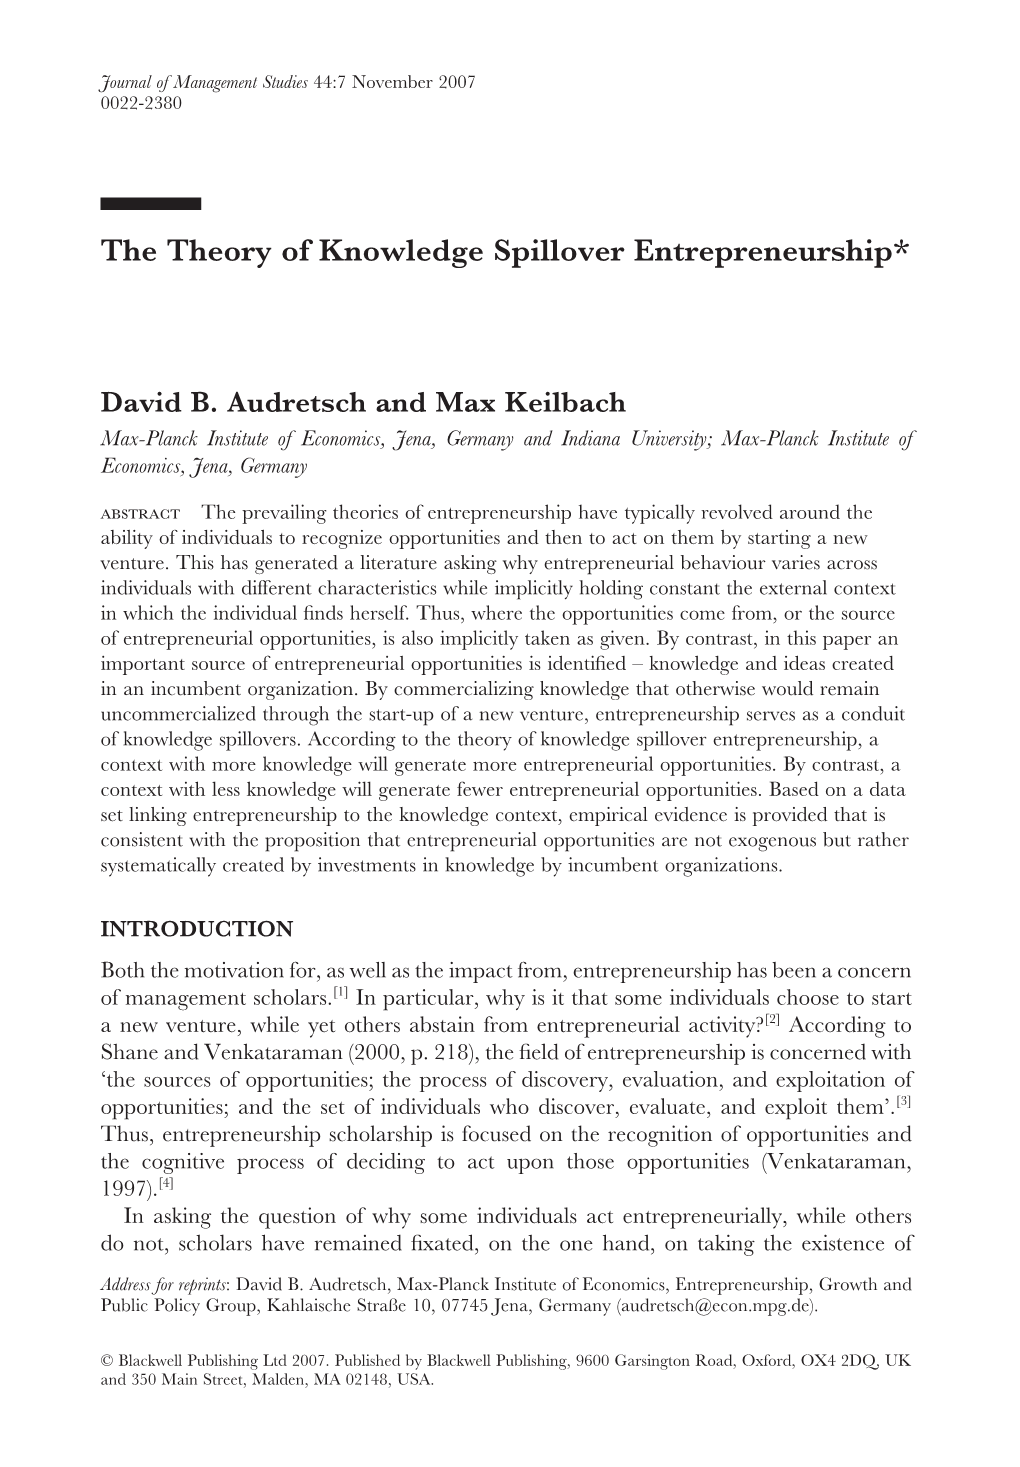 The Theory of Knowledge Spillover Entrepreneurship*